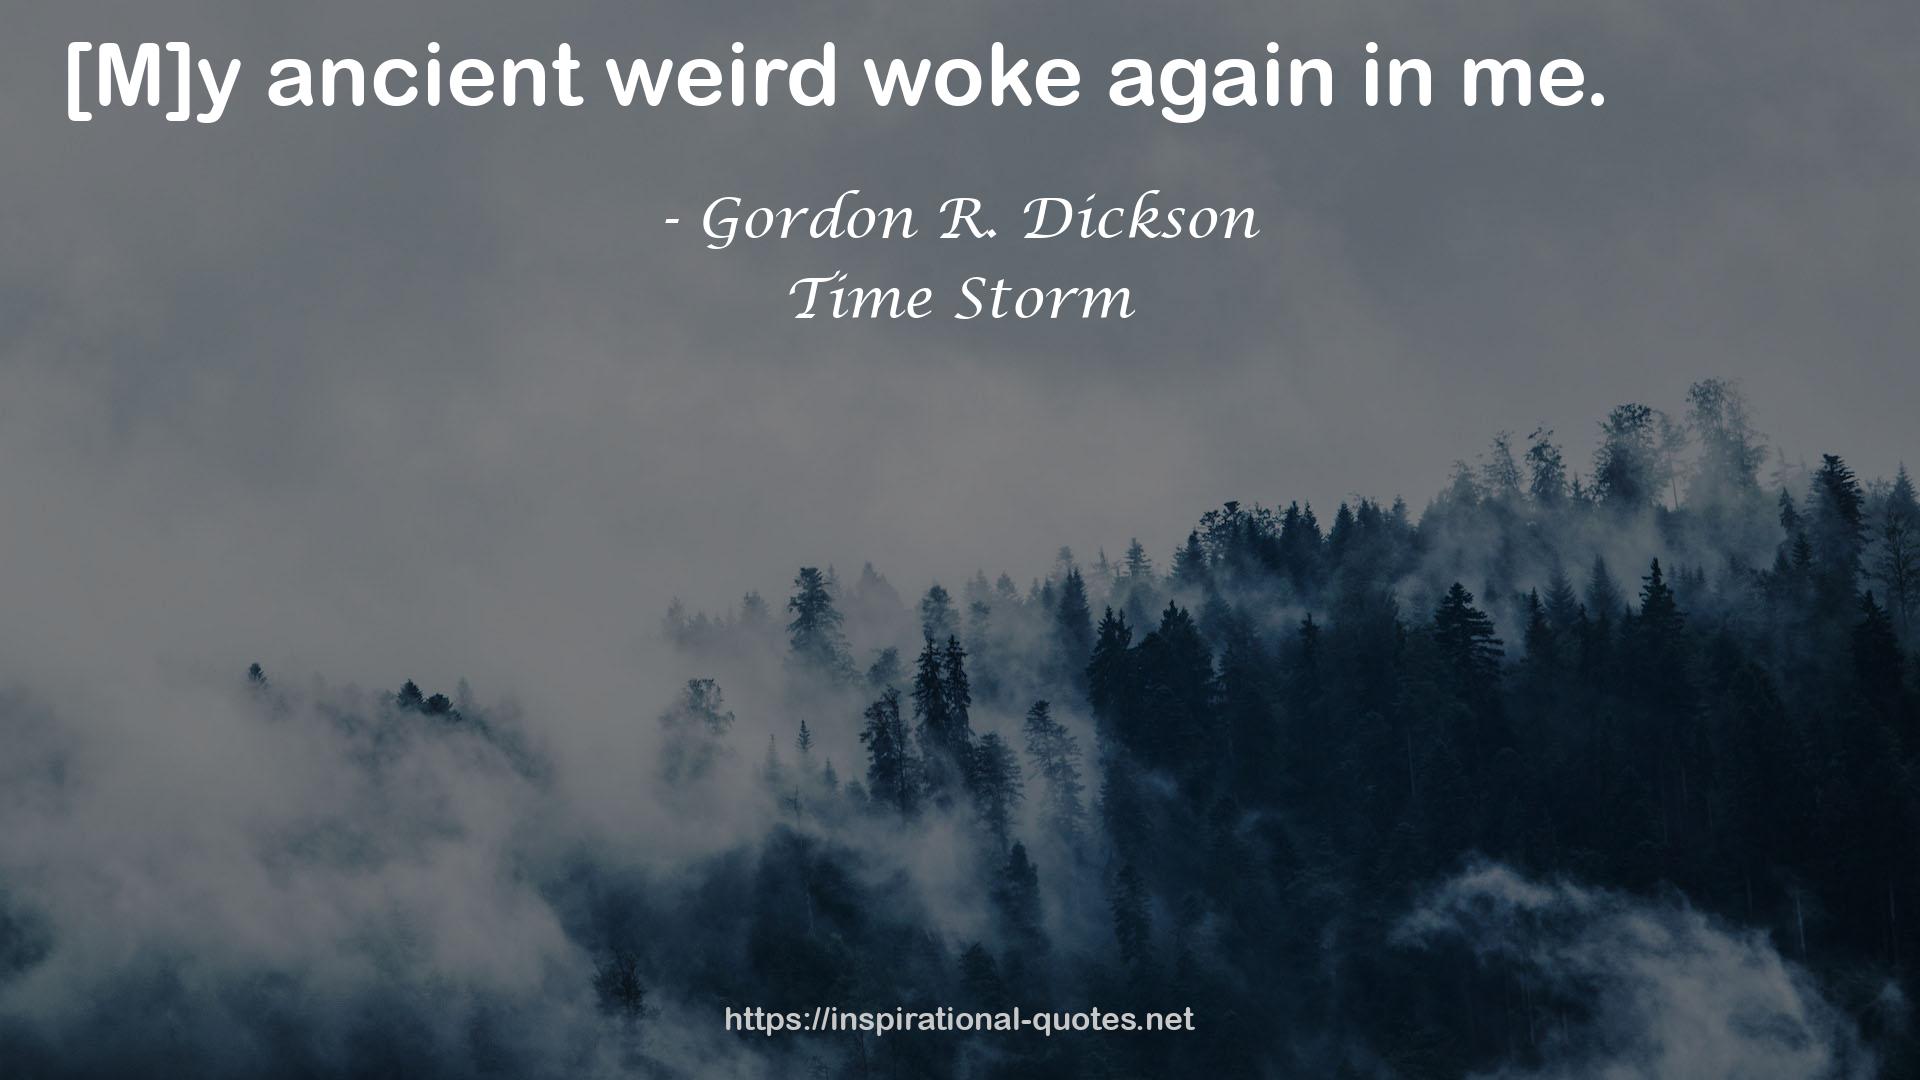 Time Storm QUOTES